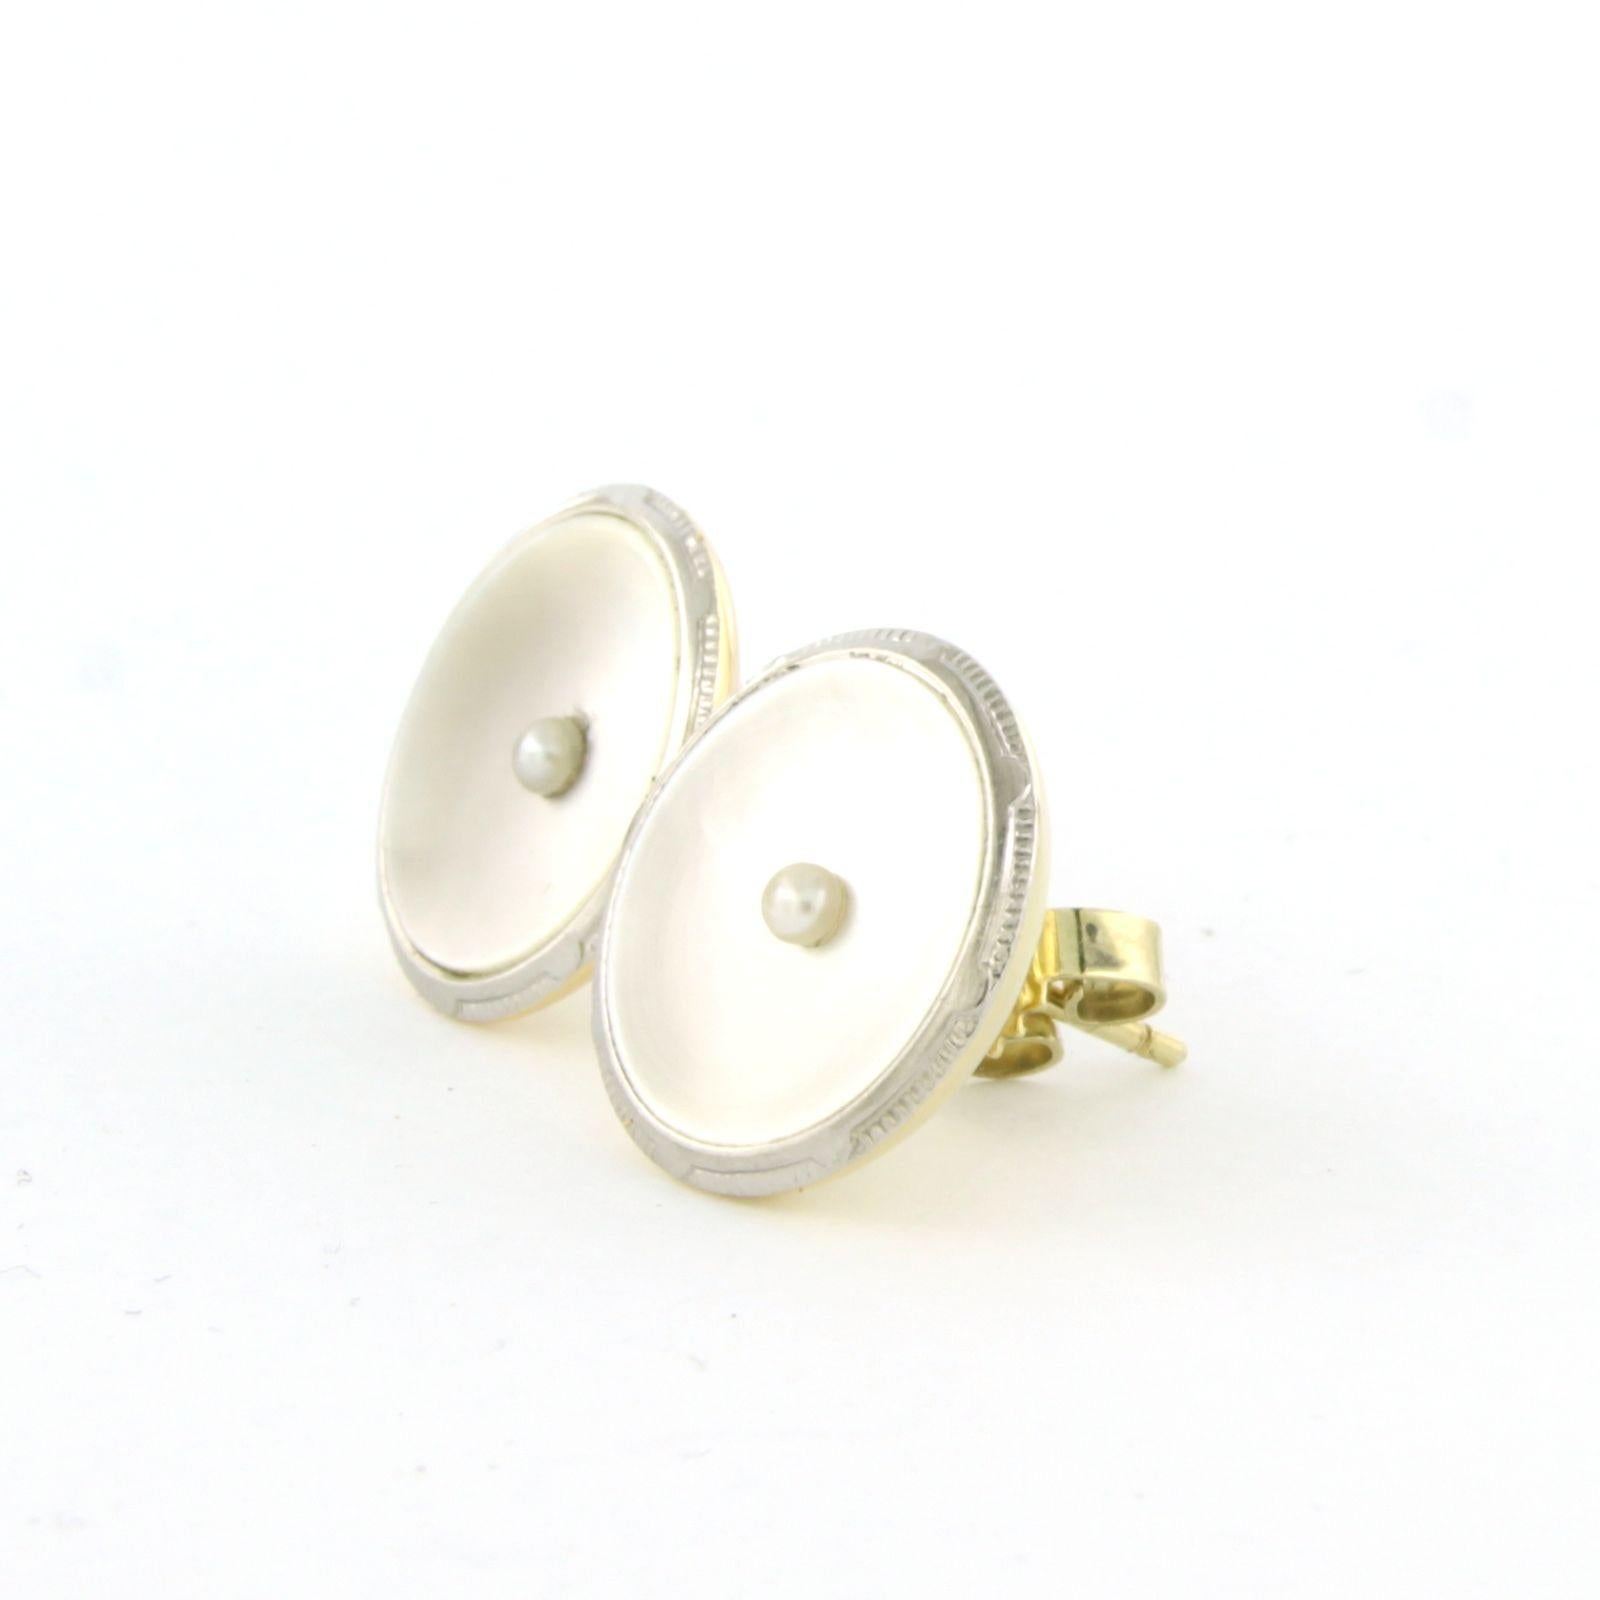 14k bicolour gold earrings with pearl and mother-of-pearl – diameter 1.5 cm

Detailed description:

the diameter of the ear stud is 1.5 cm wide

Total weight 4.8 grams

set with

- 2 x 1.3 cm round mother of pearl

colour White
purity :…..

- 2 x